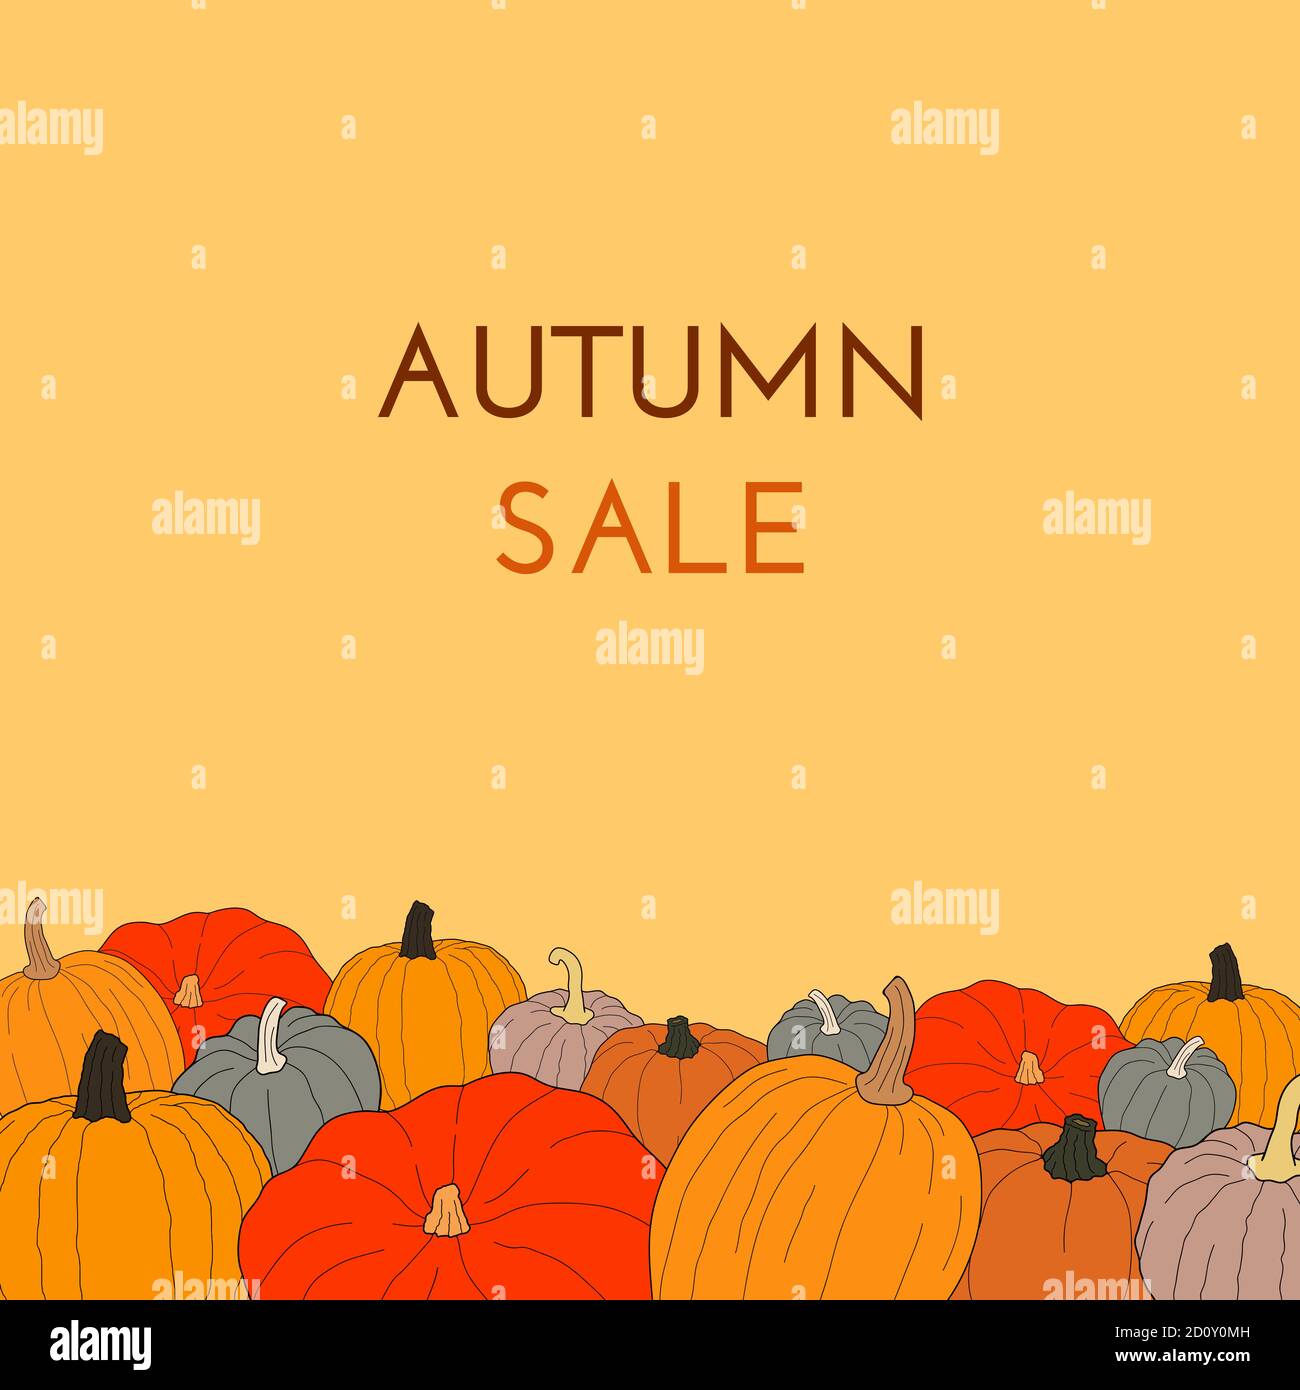 Autumn sale text vector banner with colorful pumpkins on orange background for shopping discount promotion. Vector illustration on doodle style. Stock Vector